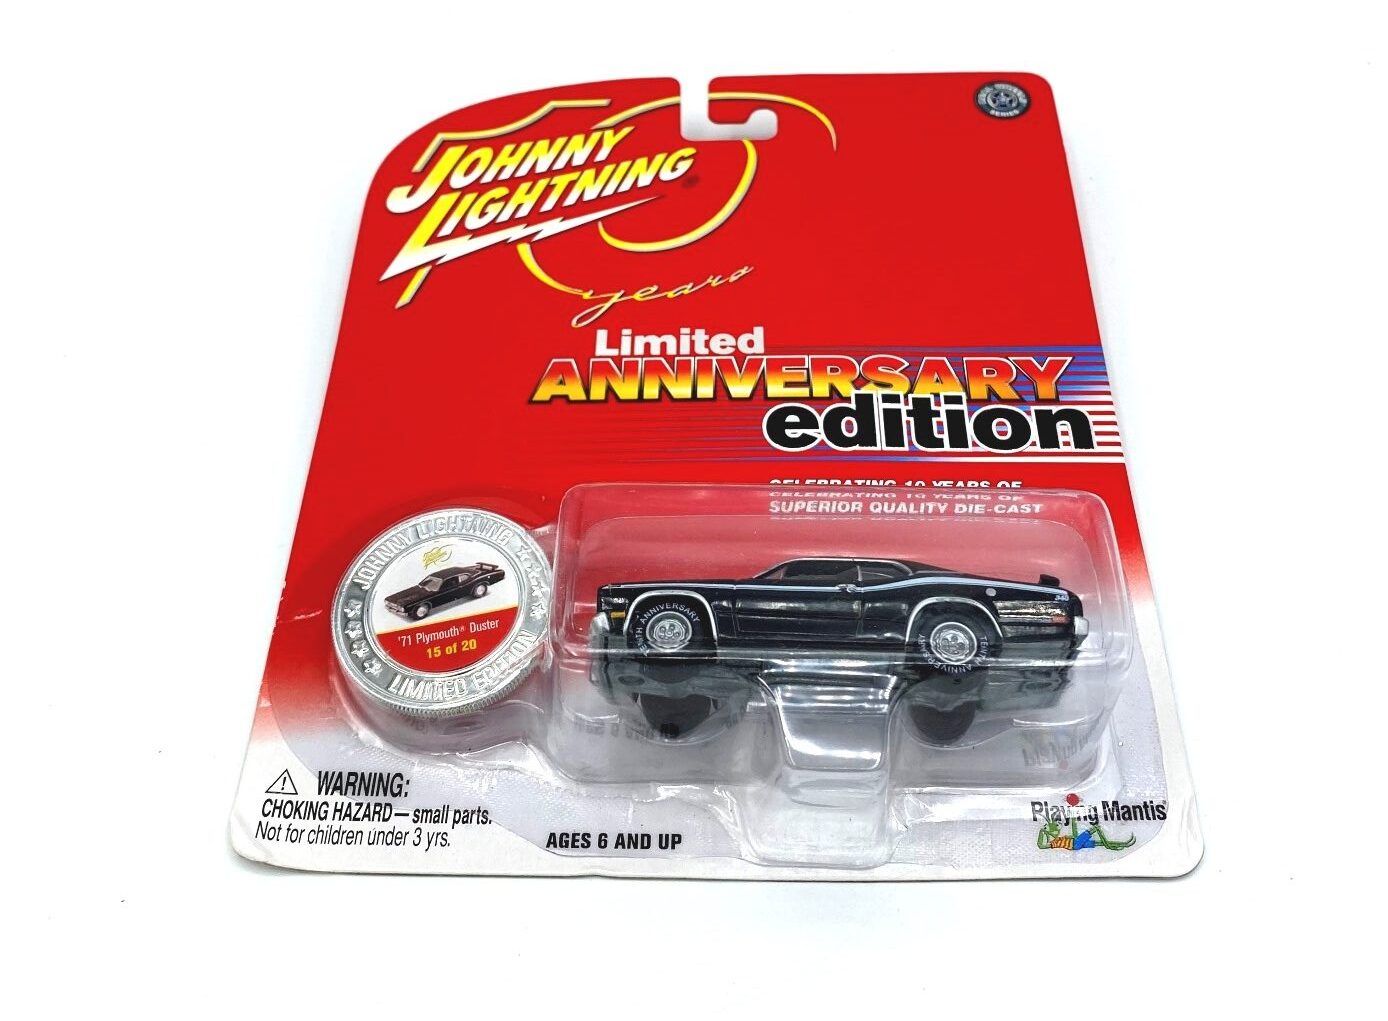 71 Plymouth Duster JOHNNY LIGHTNING 2004 Limited Anniversary Edition 1/64 scale diecast car with collectible coin 